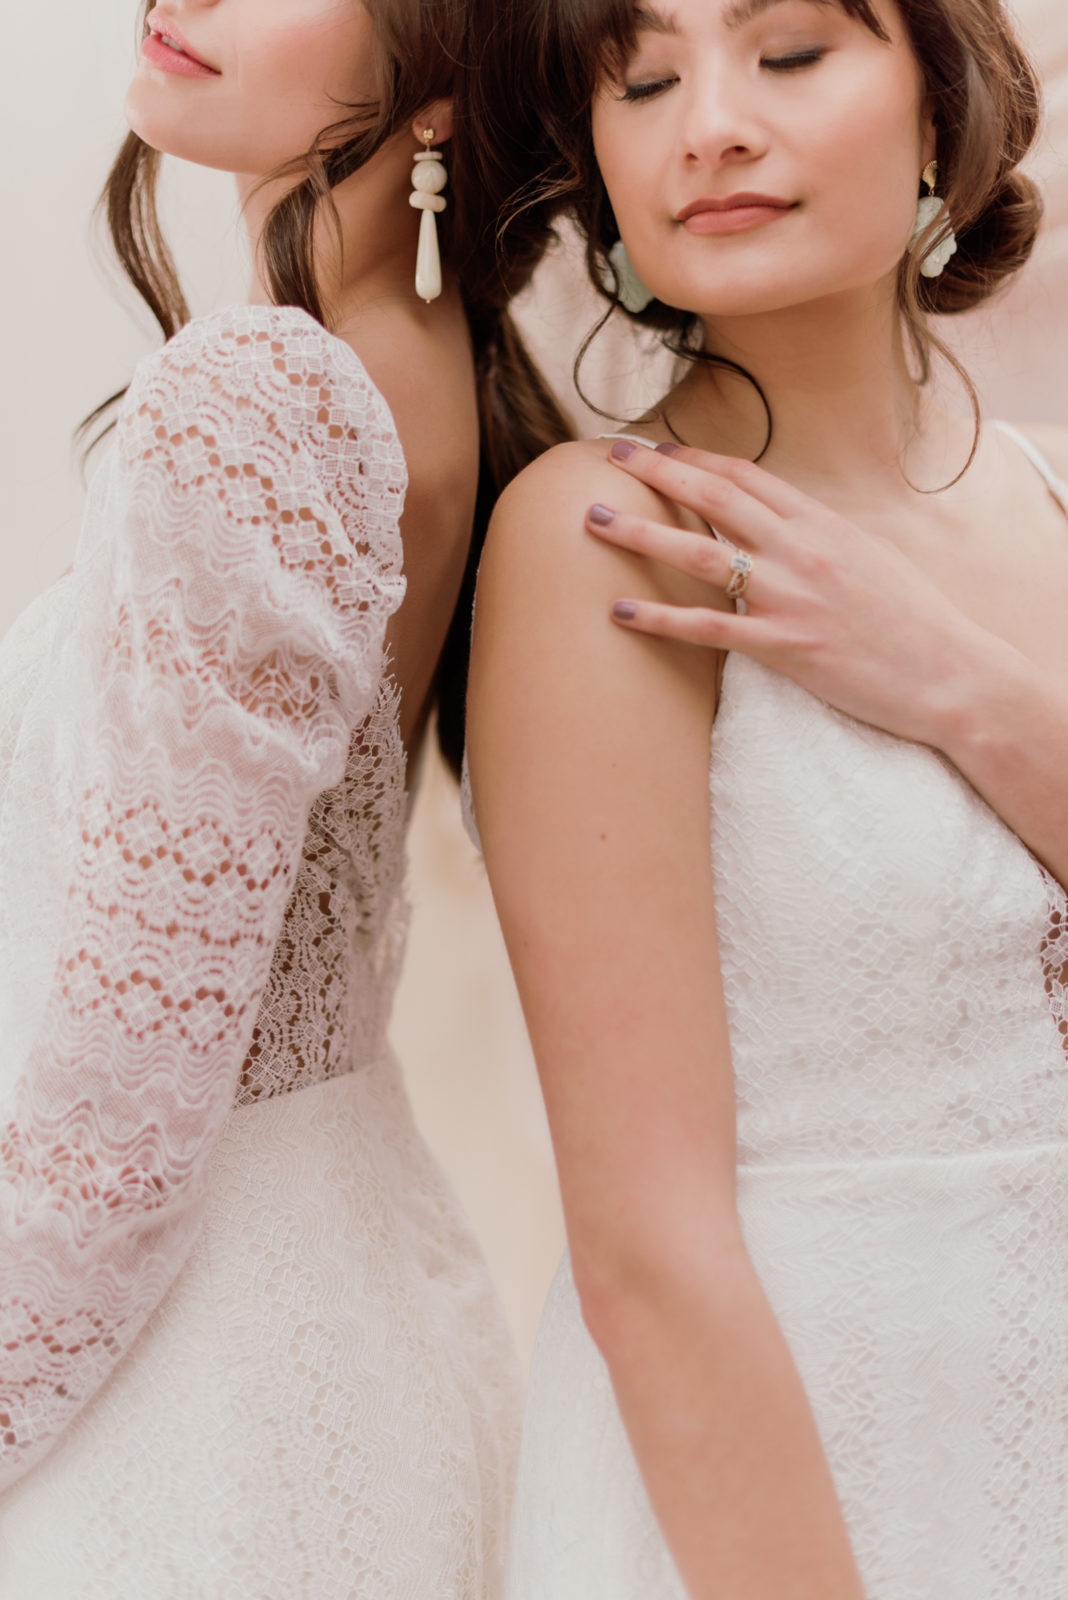 Models pose together showcasing the side view of wedding gowns included in Lovenote Bride's newest collection 